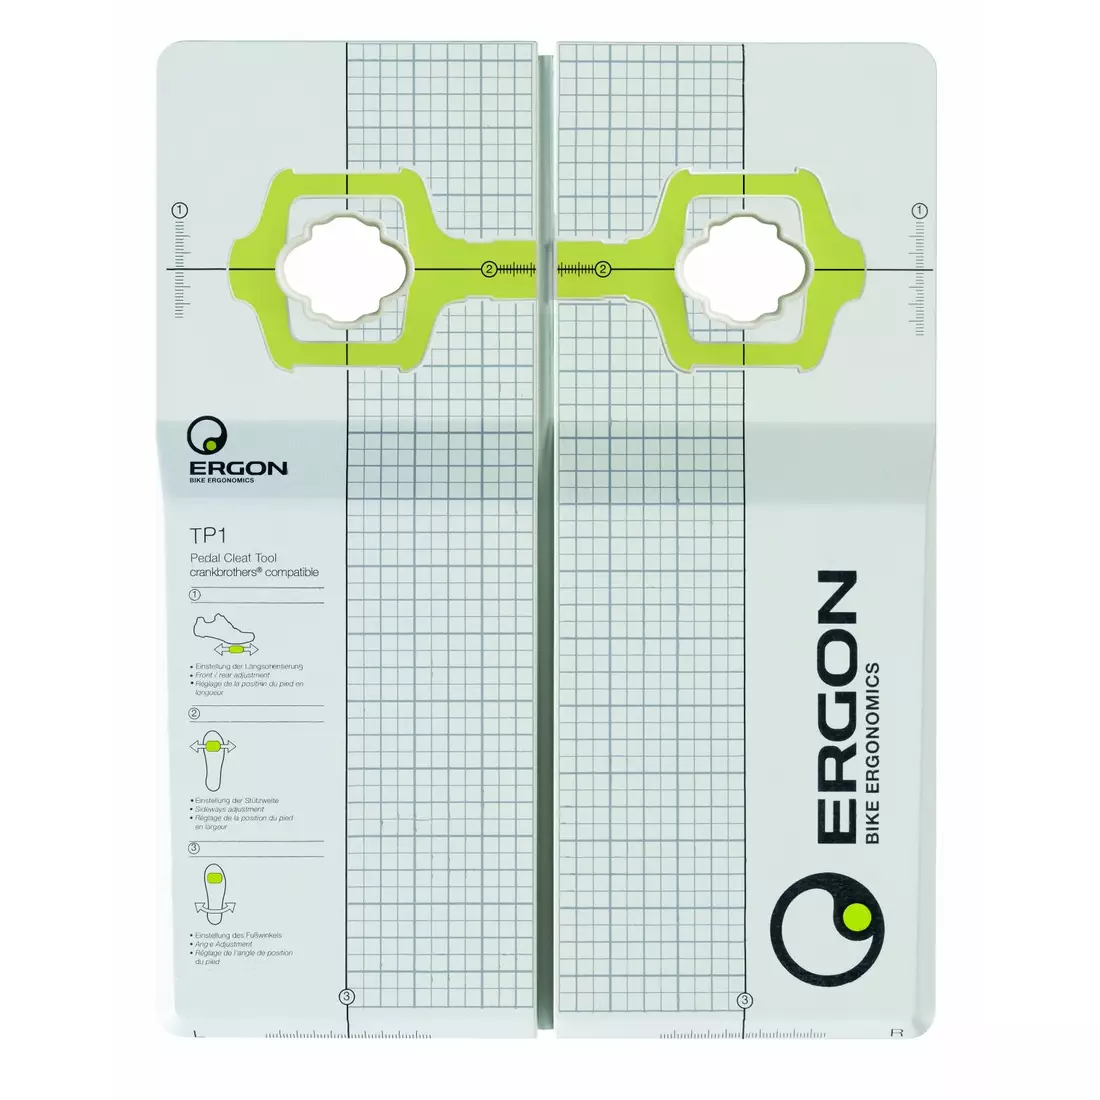 ERGON TP1 CLEAT TOOL CRANK BROTHERS template for setting Crank Brothers blocks ER-48000010